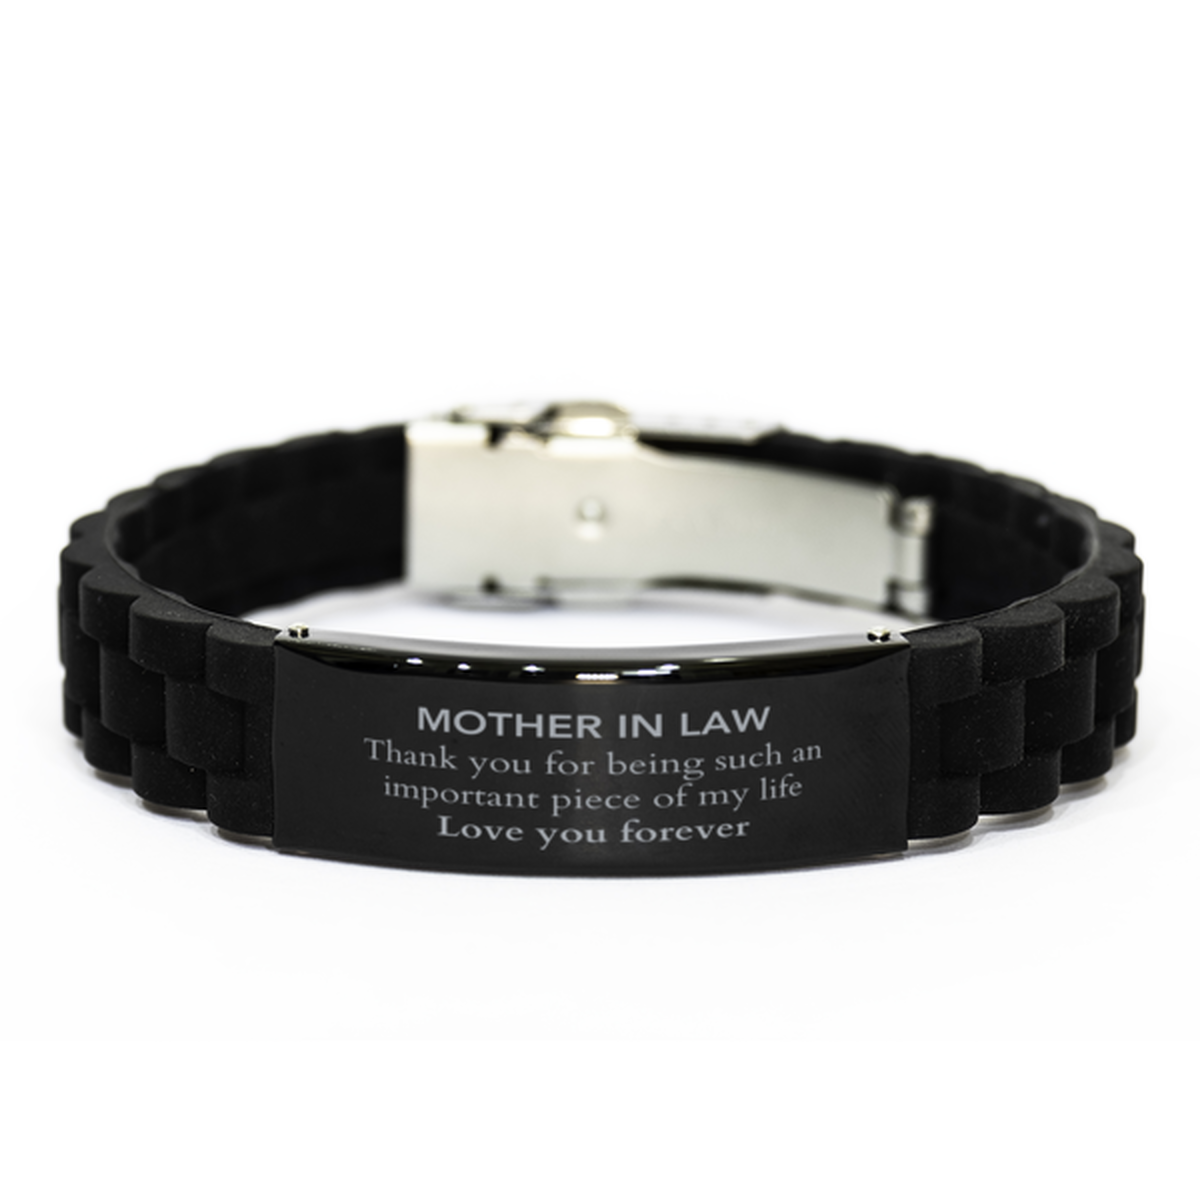 Appropriate Mother In Law Black Glidelock Clasp Bracelet Epic Birthday Gifts for Mother In Law Thank you for being such an important piece of my life Mother In Law Christmas Mothers Fathers Day